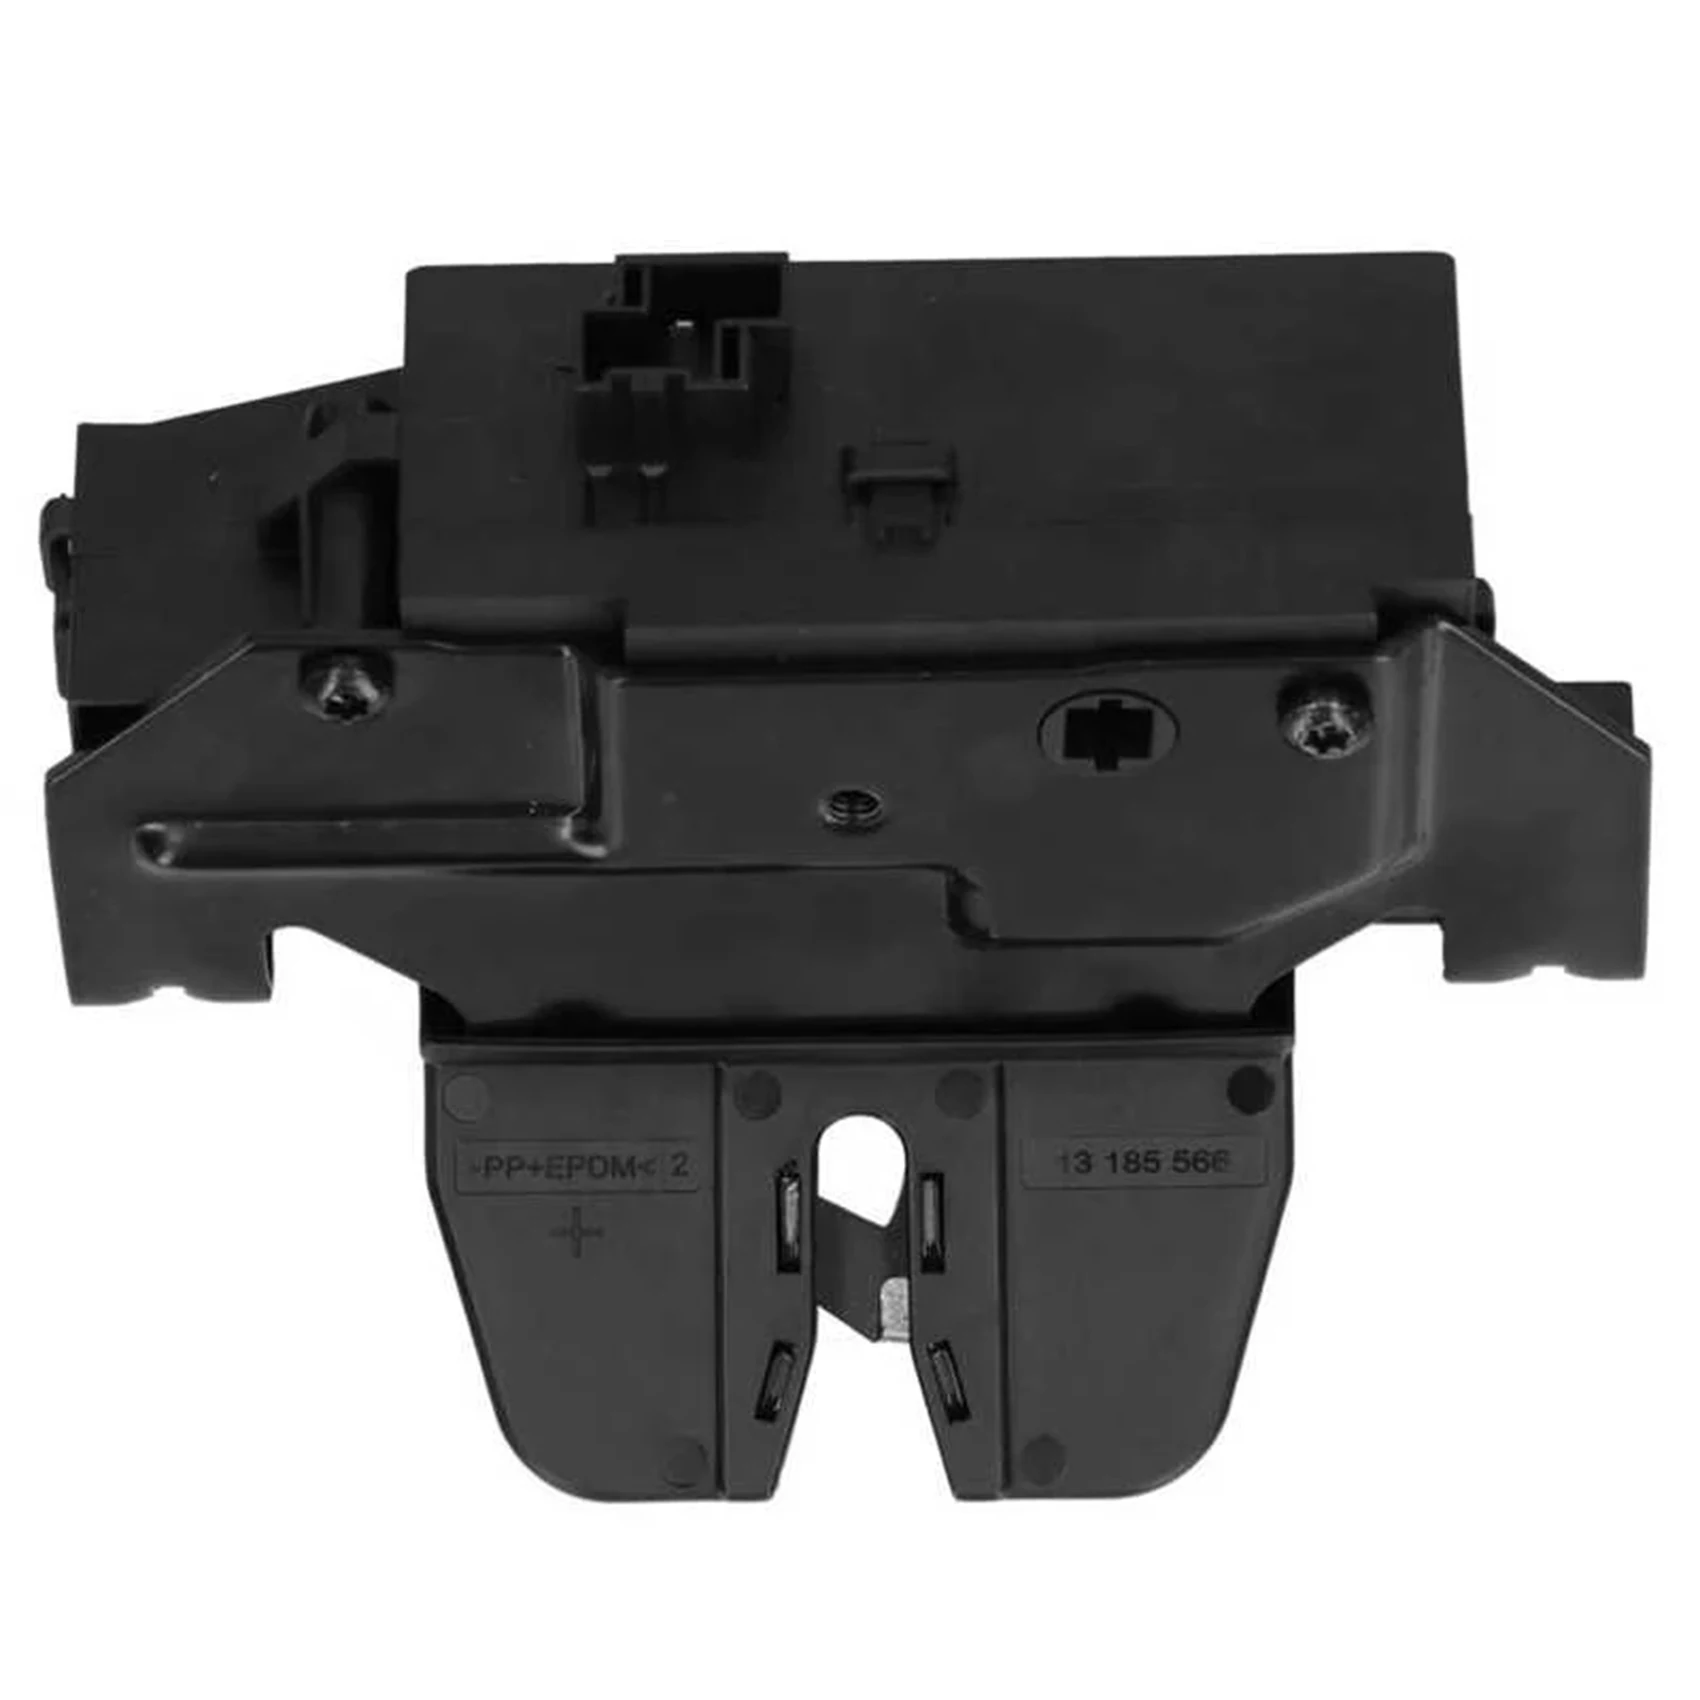 13185566-rear-tailgate-latch-actuator-tailgate-trunk-lock-13185566-parts-replacement-for-opel-vectra-c-signum